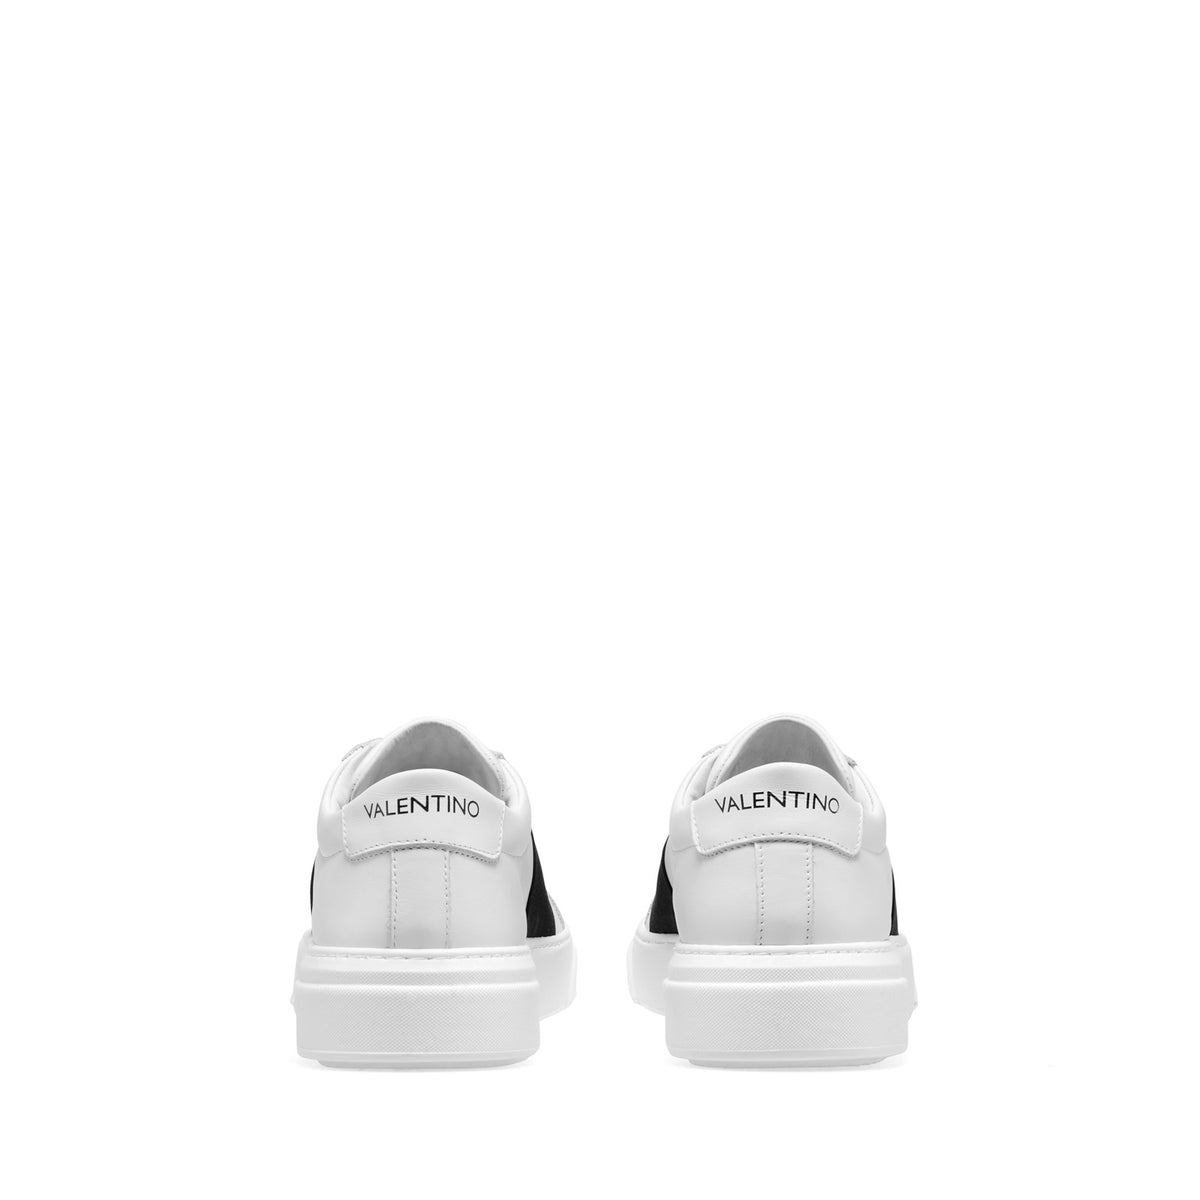 Valentino Men's Sneakers in White Leather and Black Elastic Band 